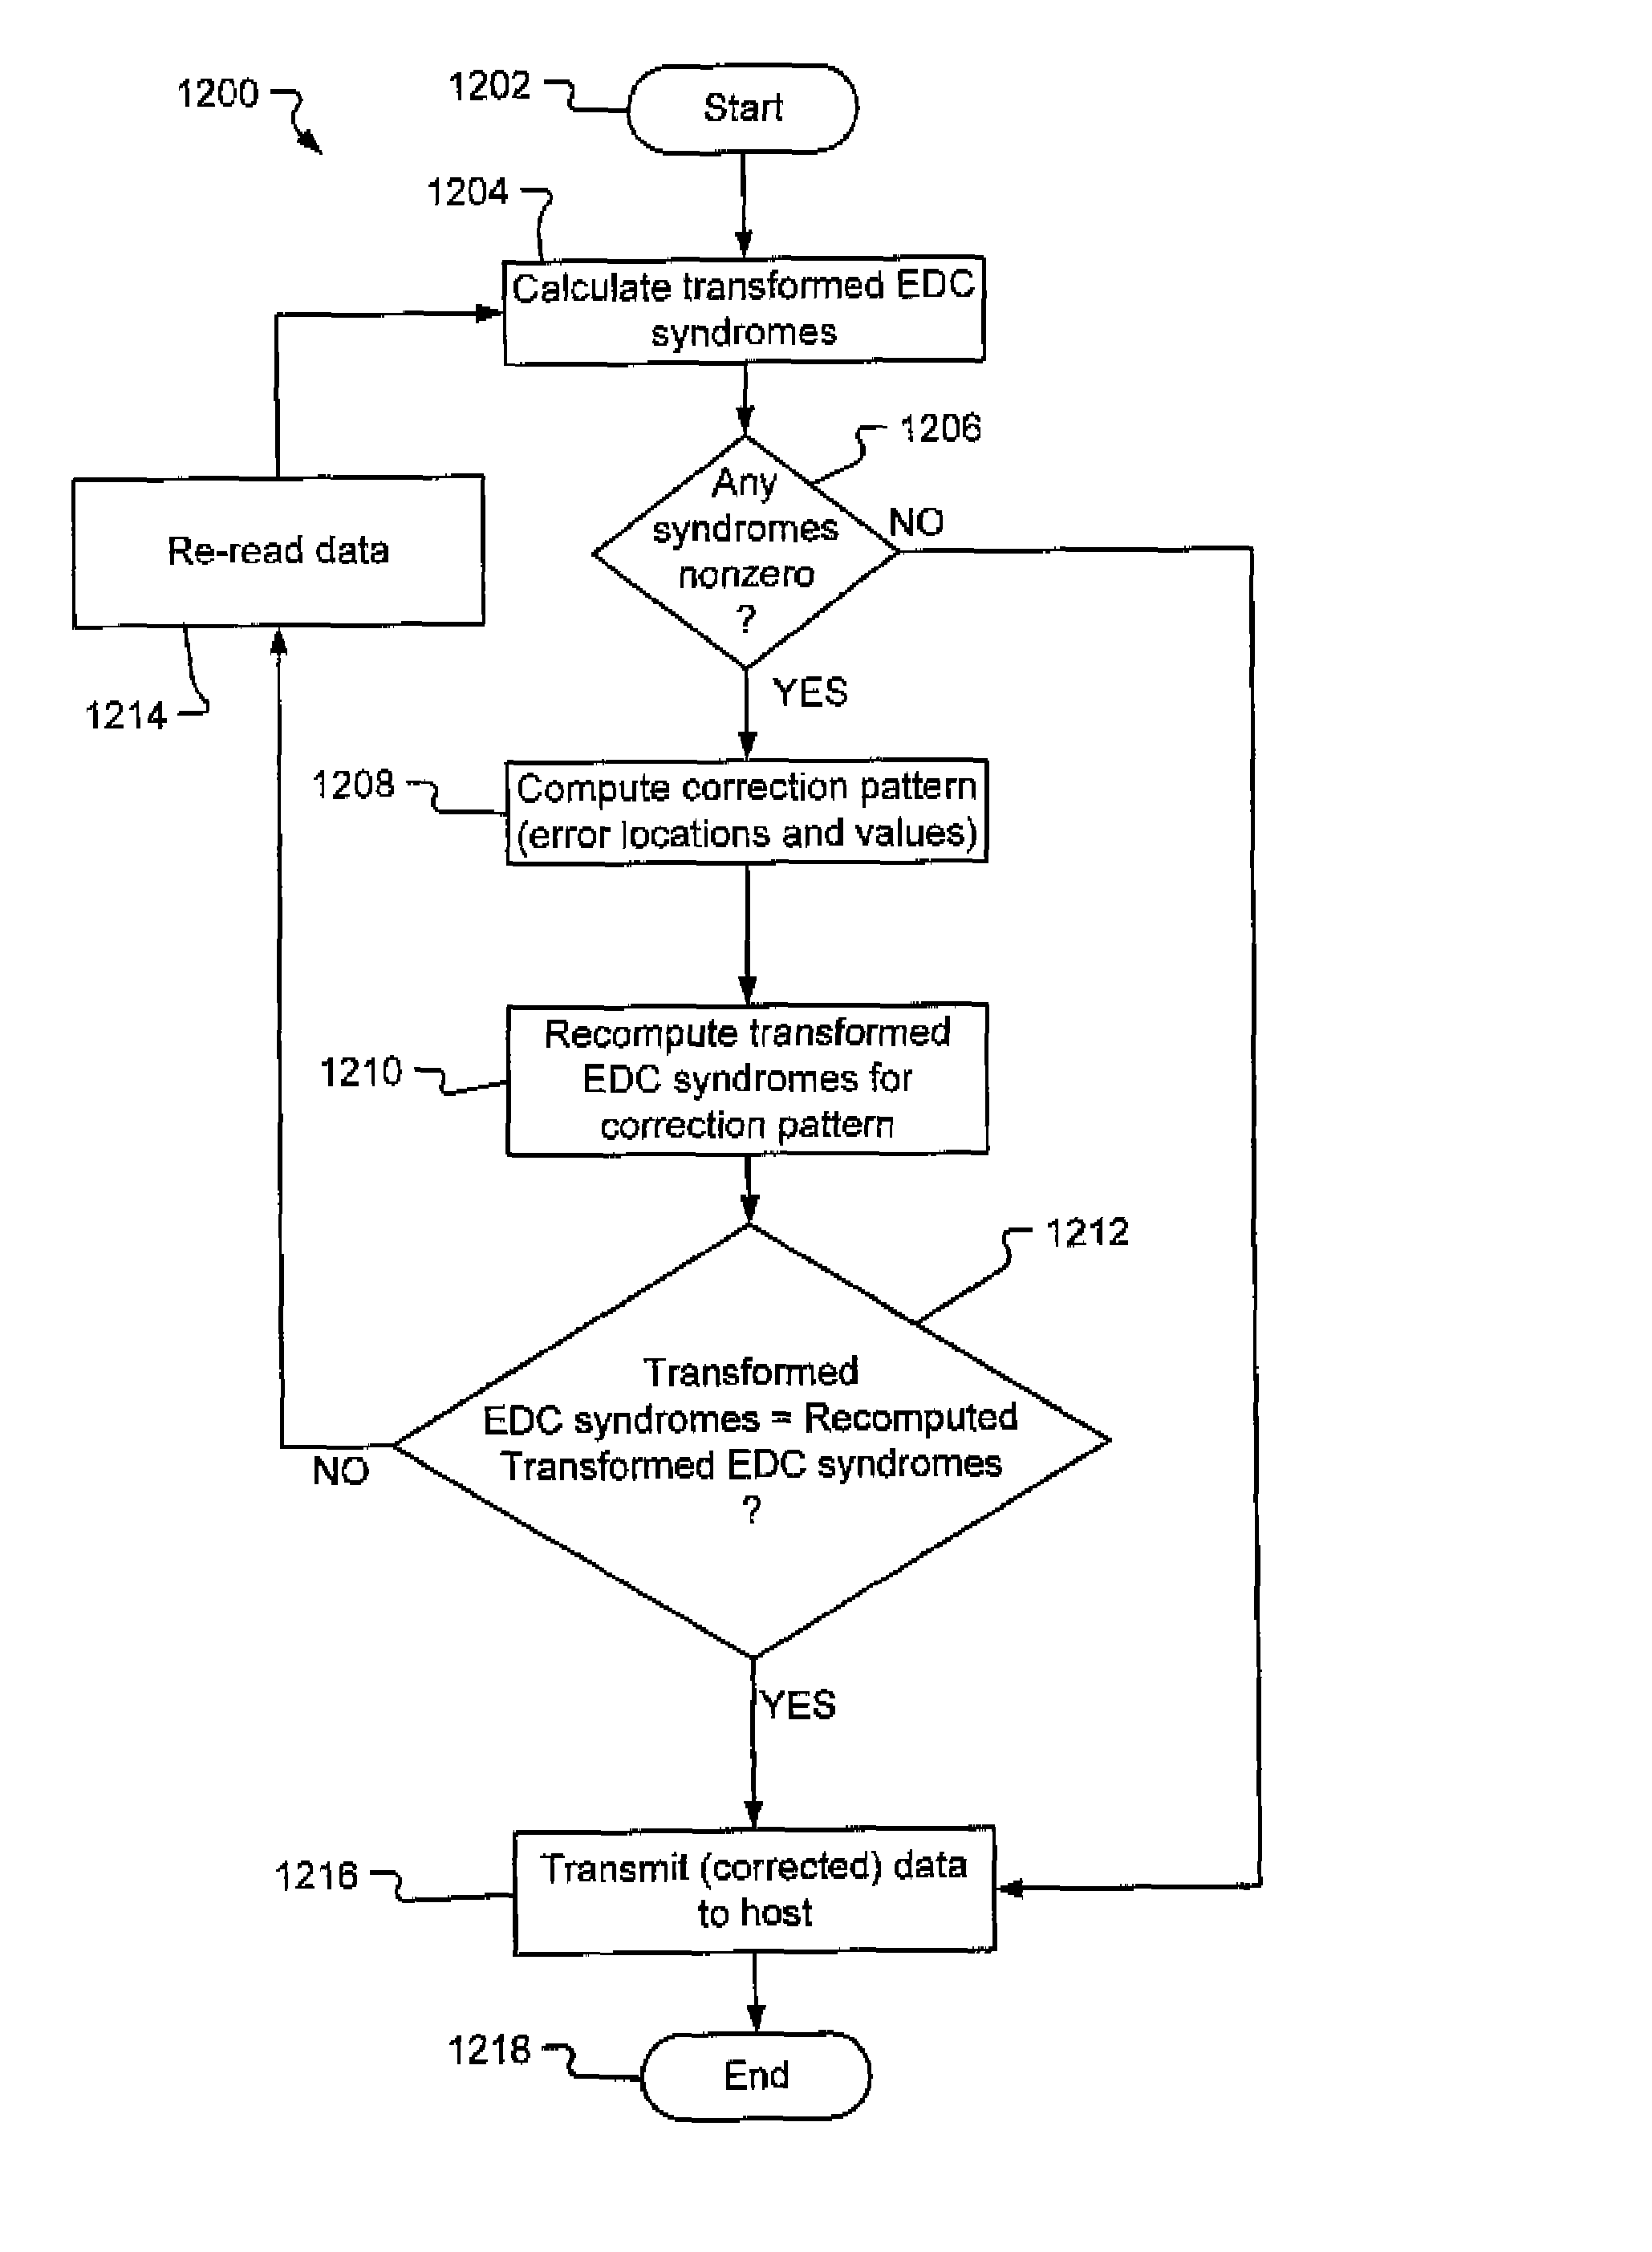 Computing an error detection code syndrome based on a correction pattern